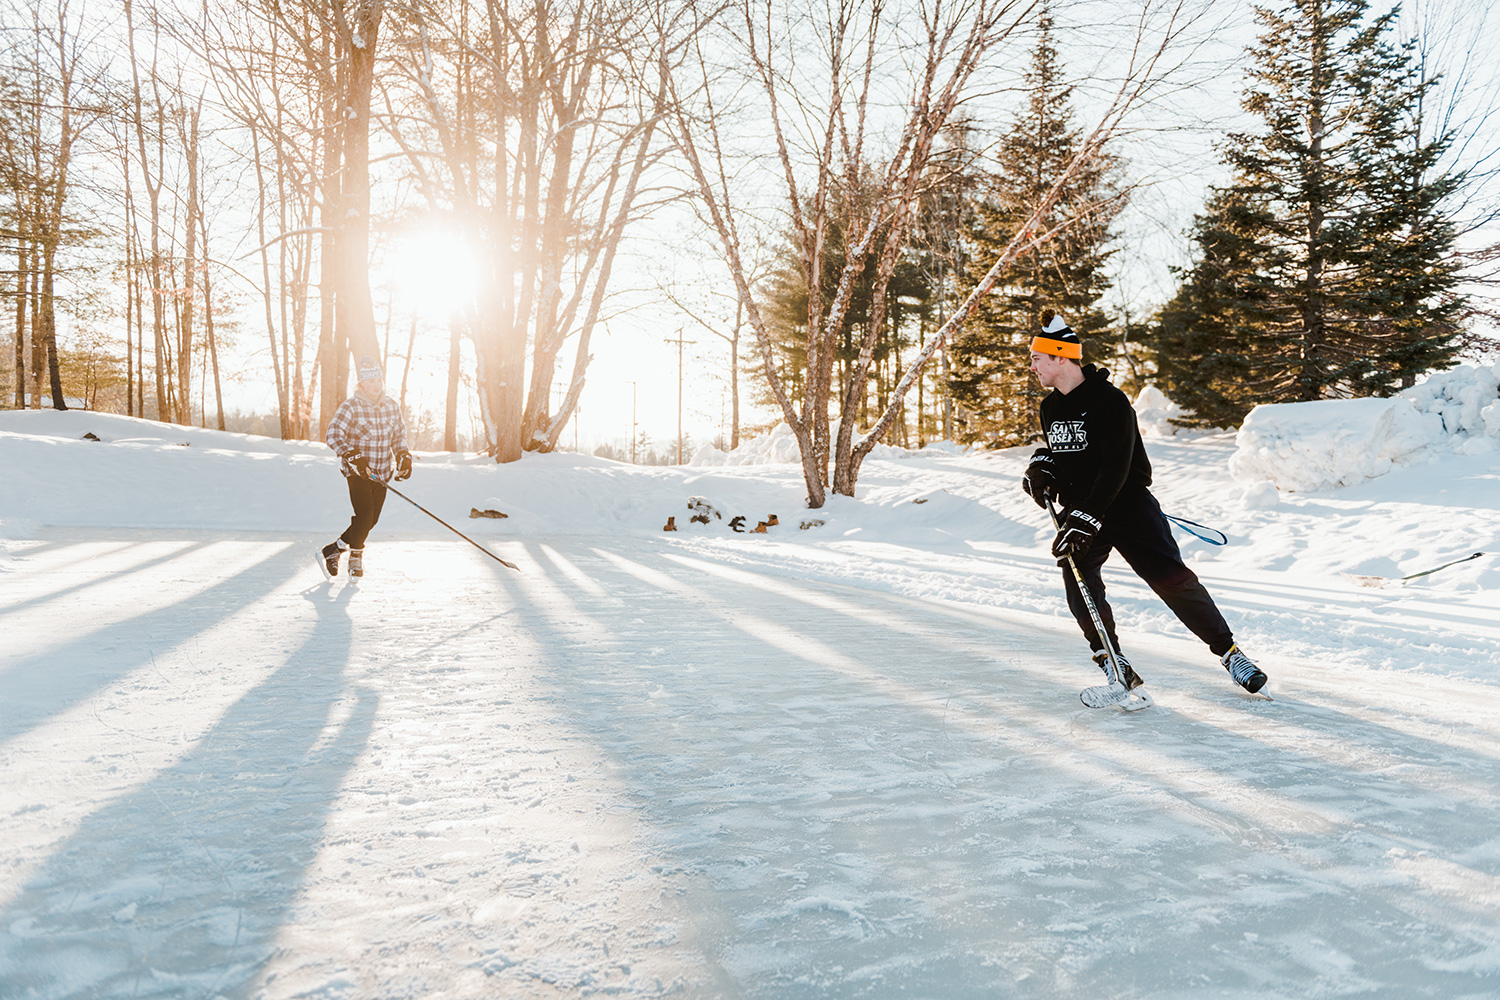 You and your friends can enjoy a game of pond hockey, or you can ice skate outside on our pond.